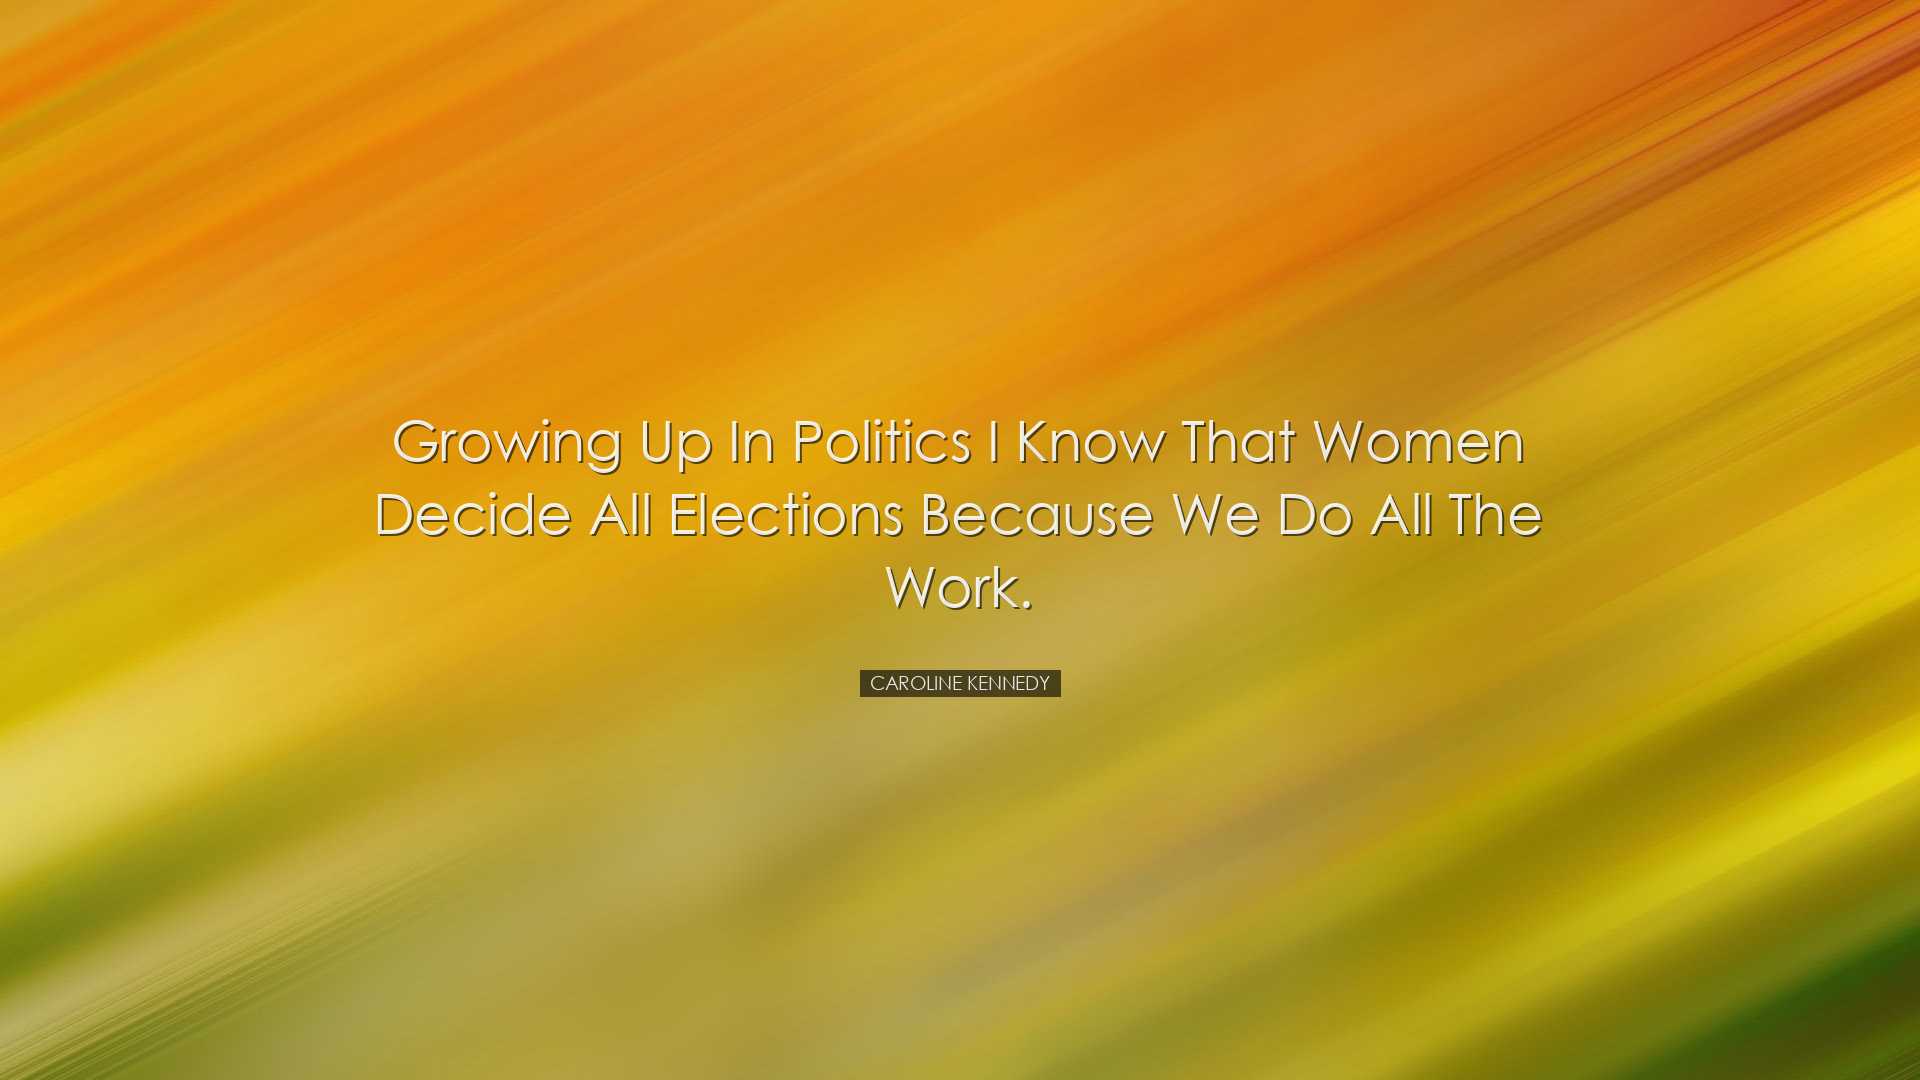 Growing up in politics I know that women decide all elections beca